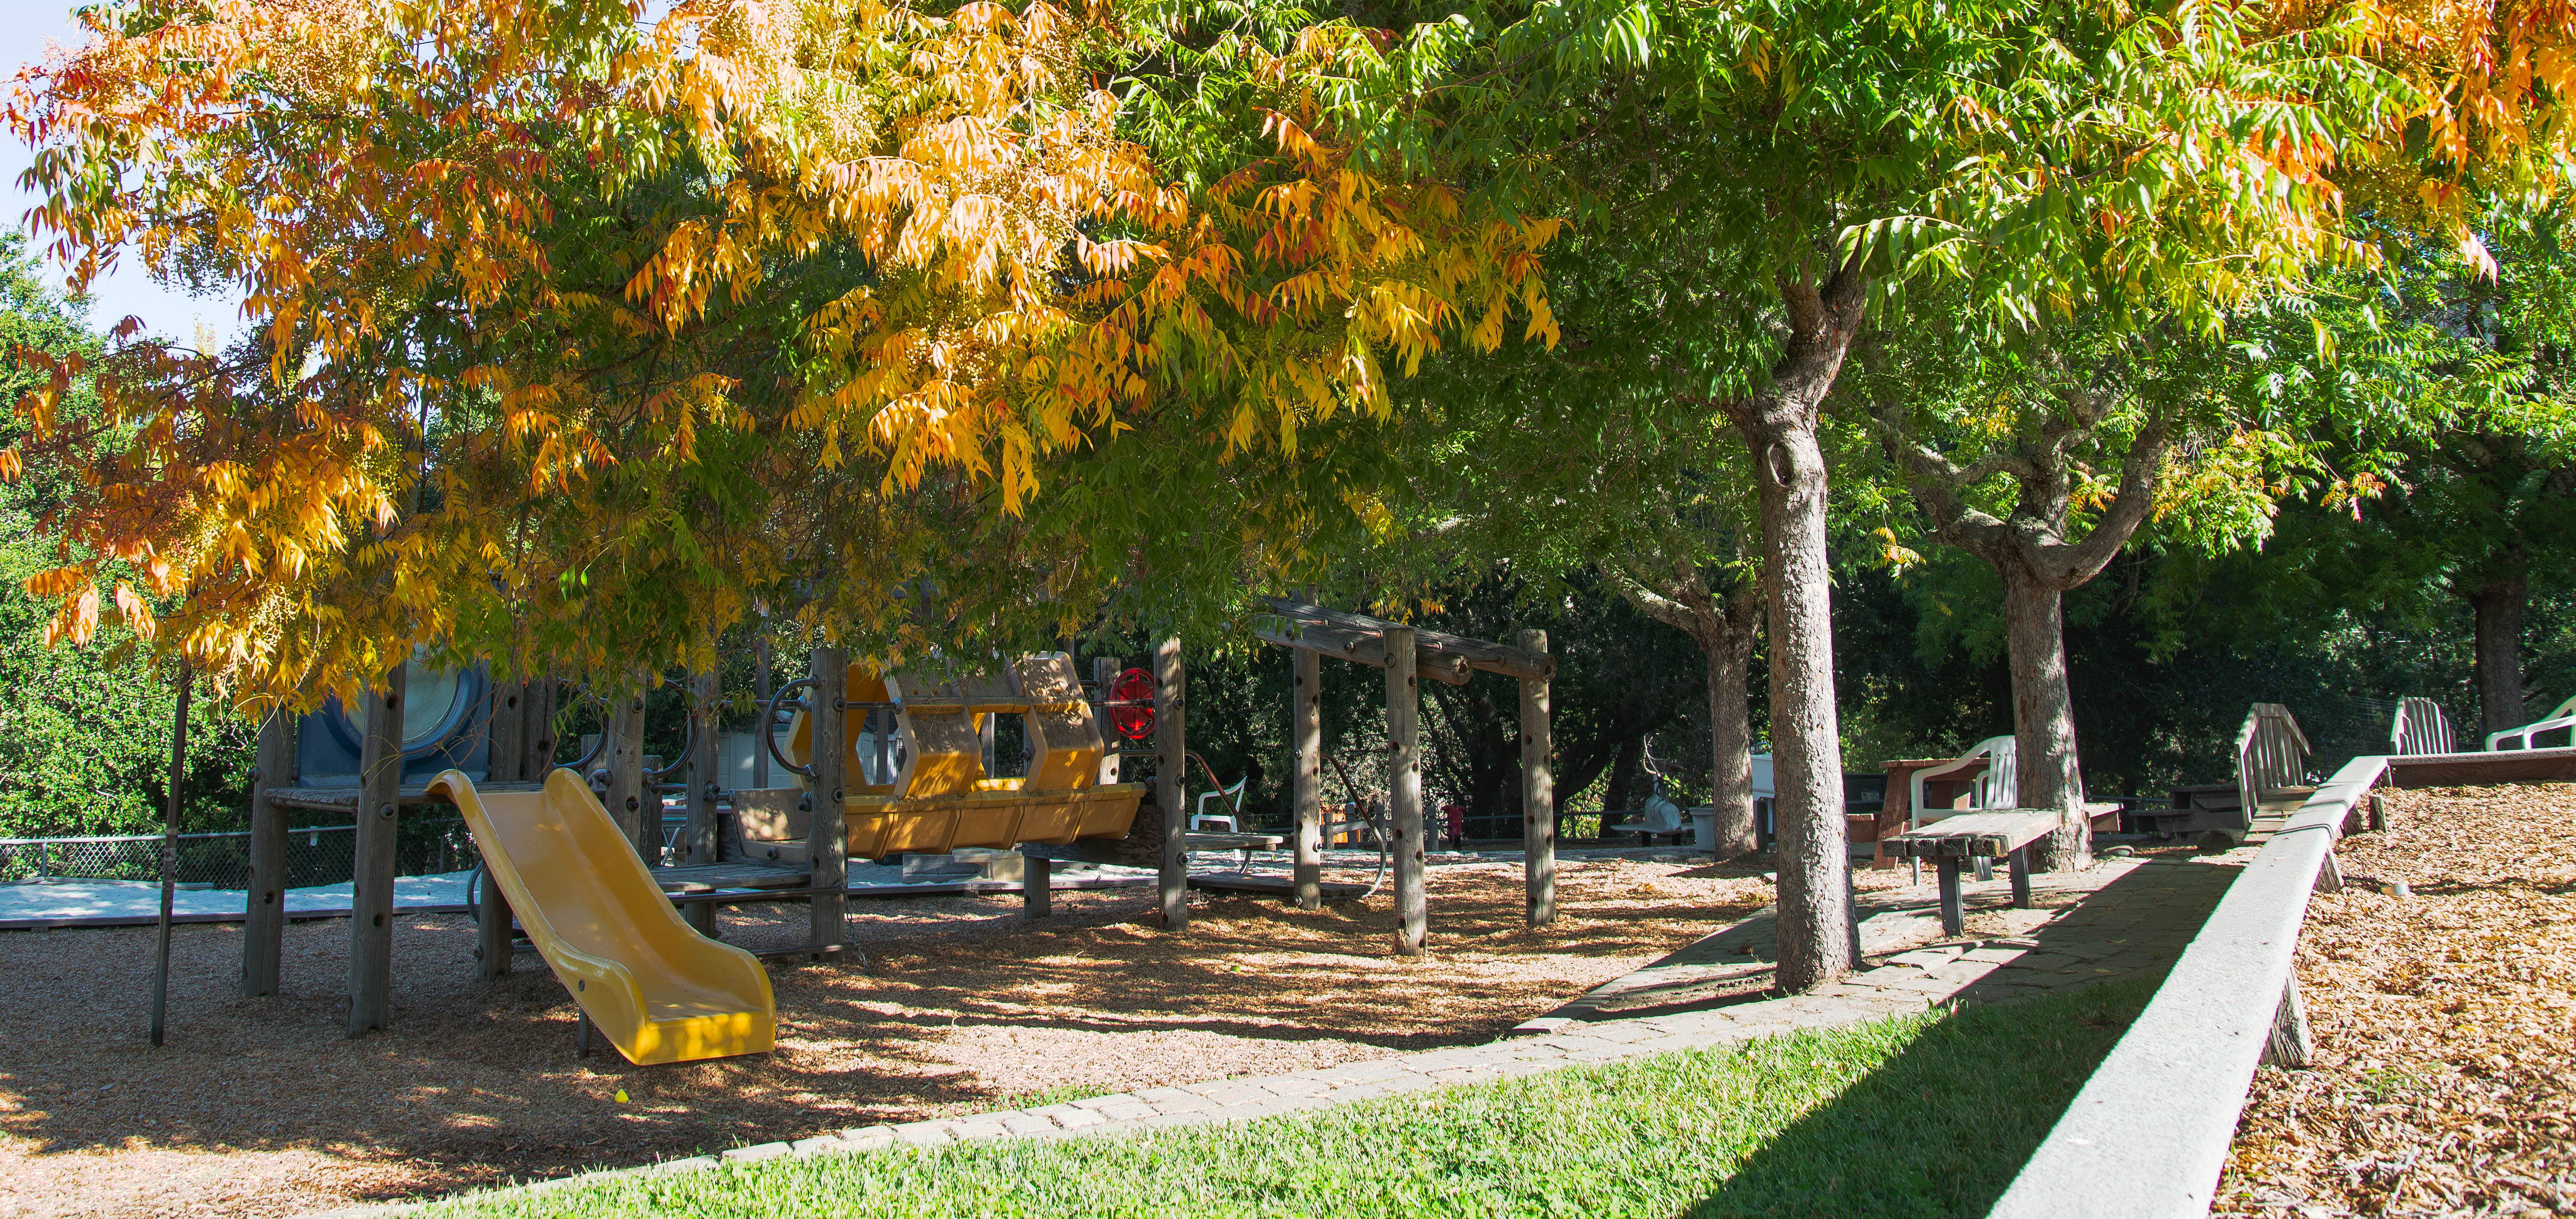 Outdoor play area and trees with fall colors on the leaves